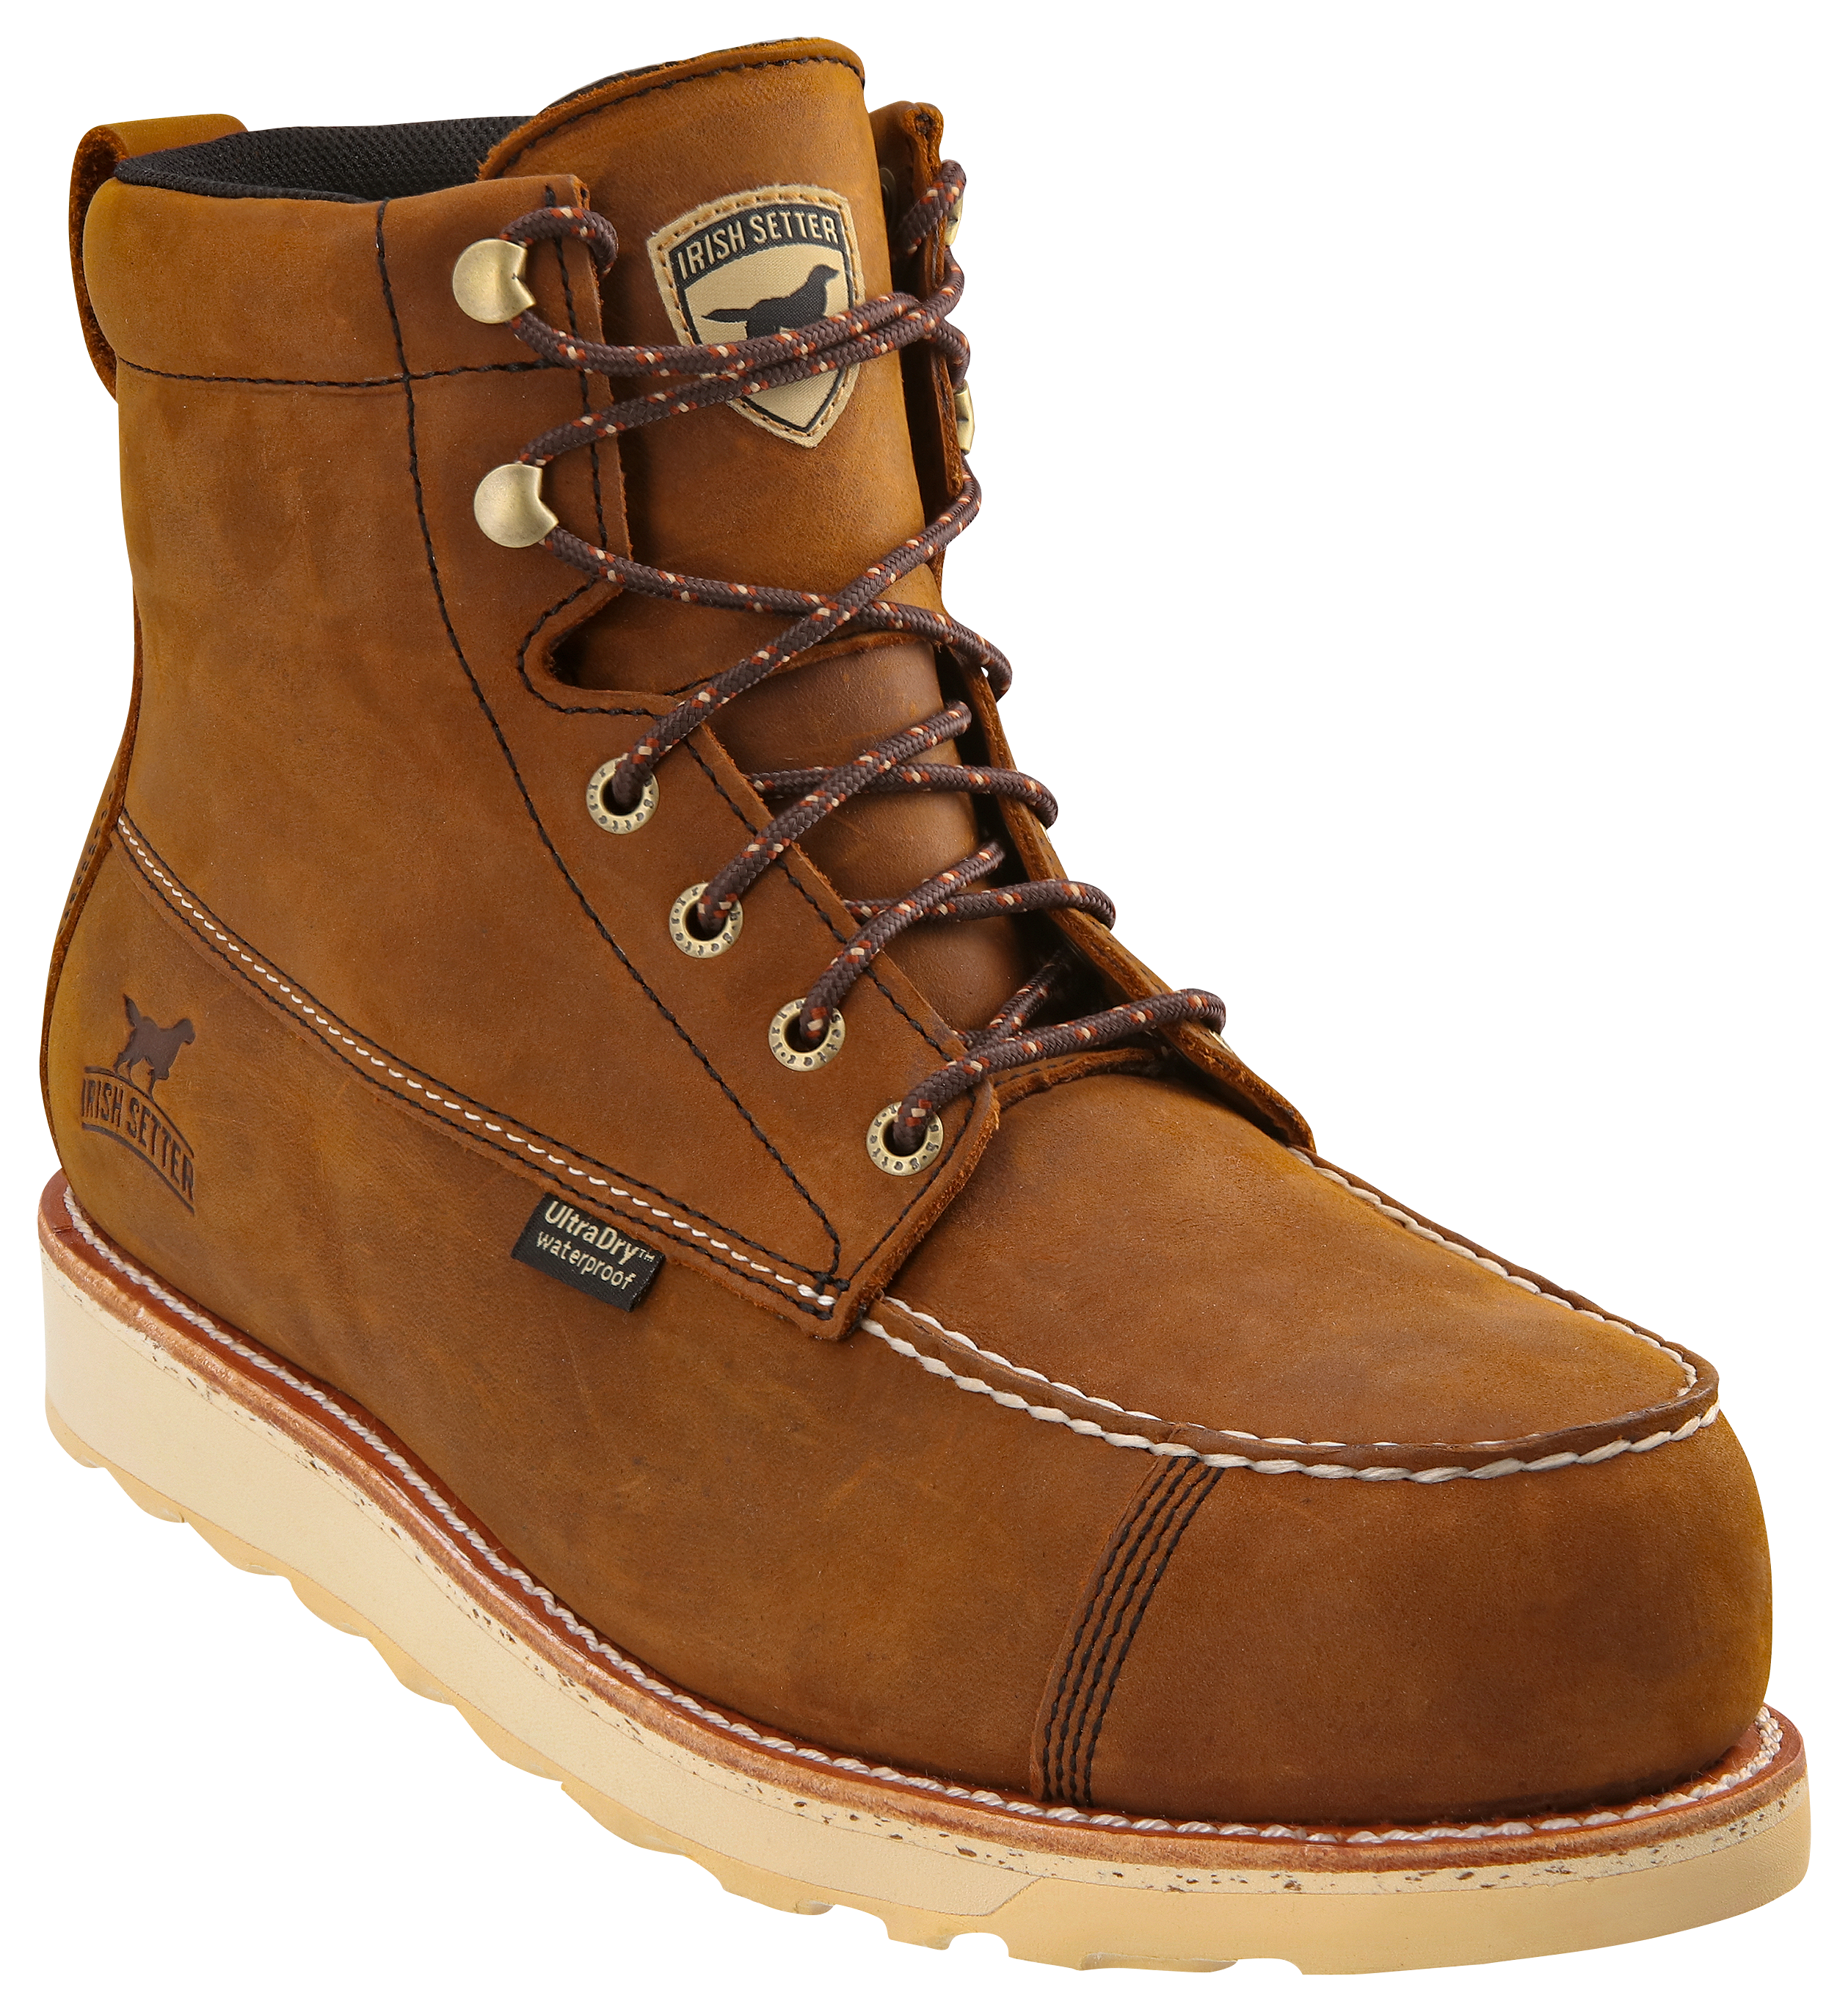 Irish Setter Wingshooter ST Waterproof Safety Toe Work Boots for Men